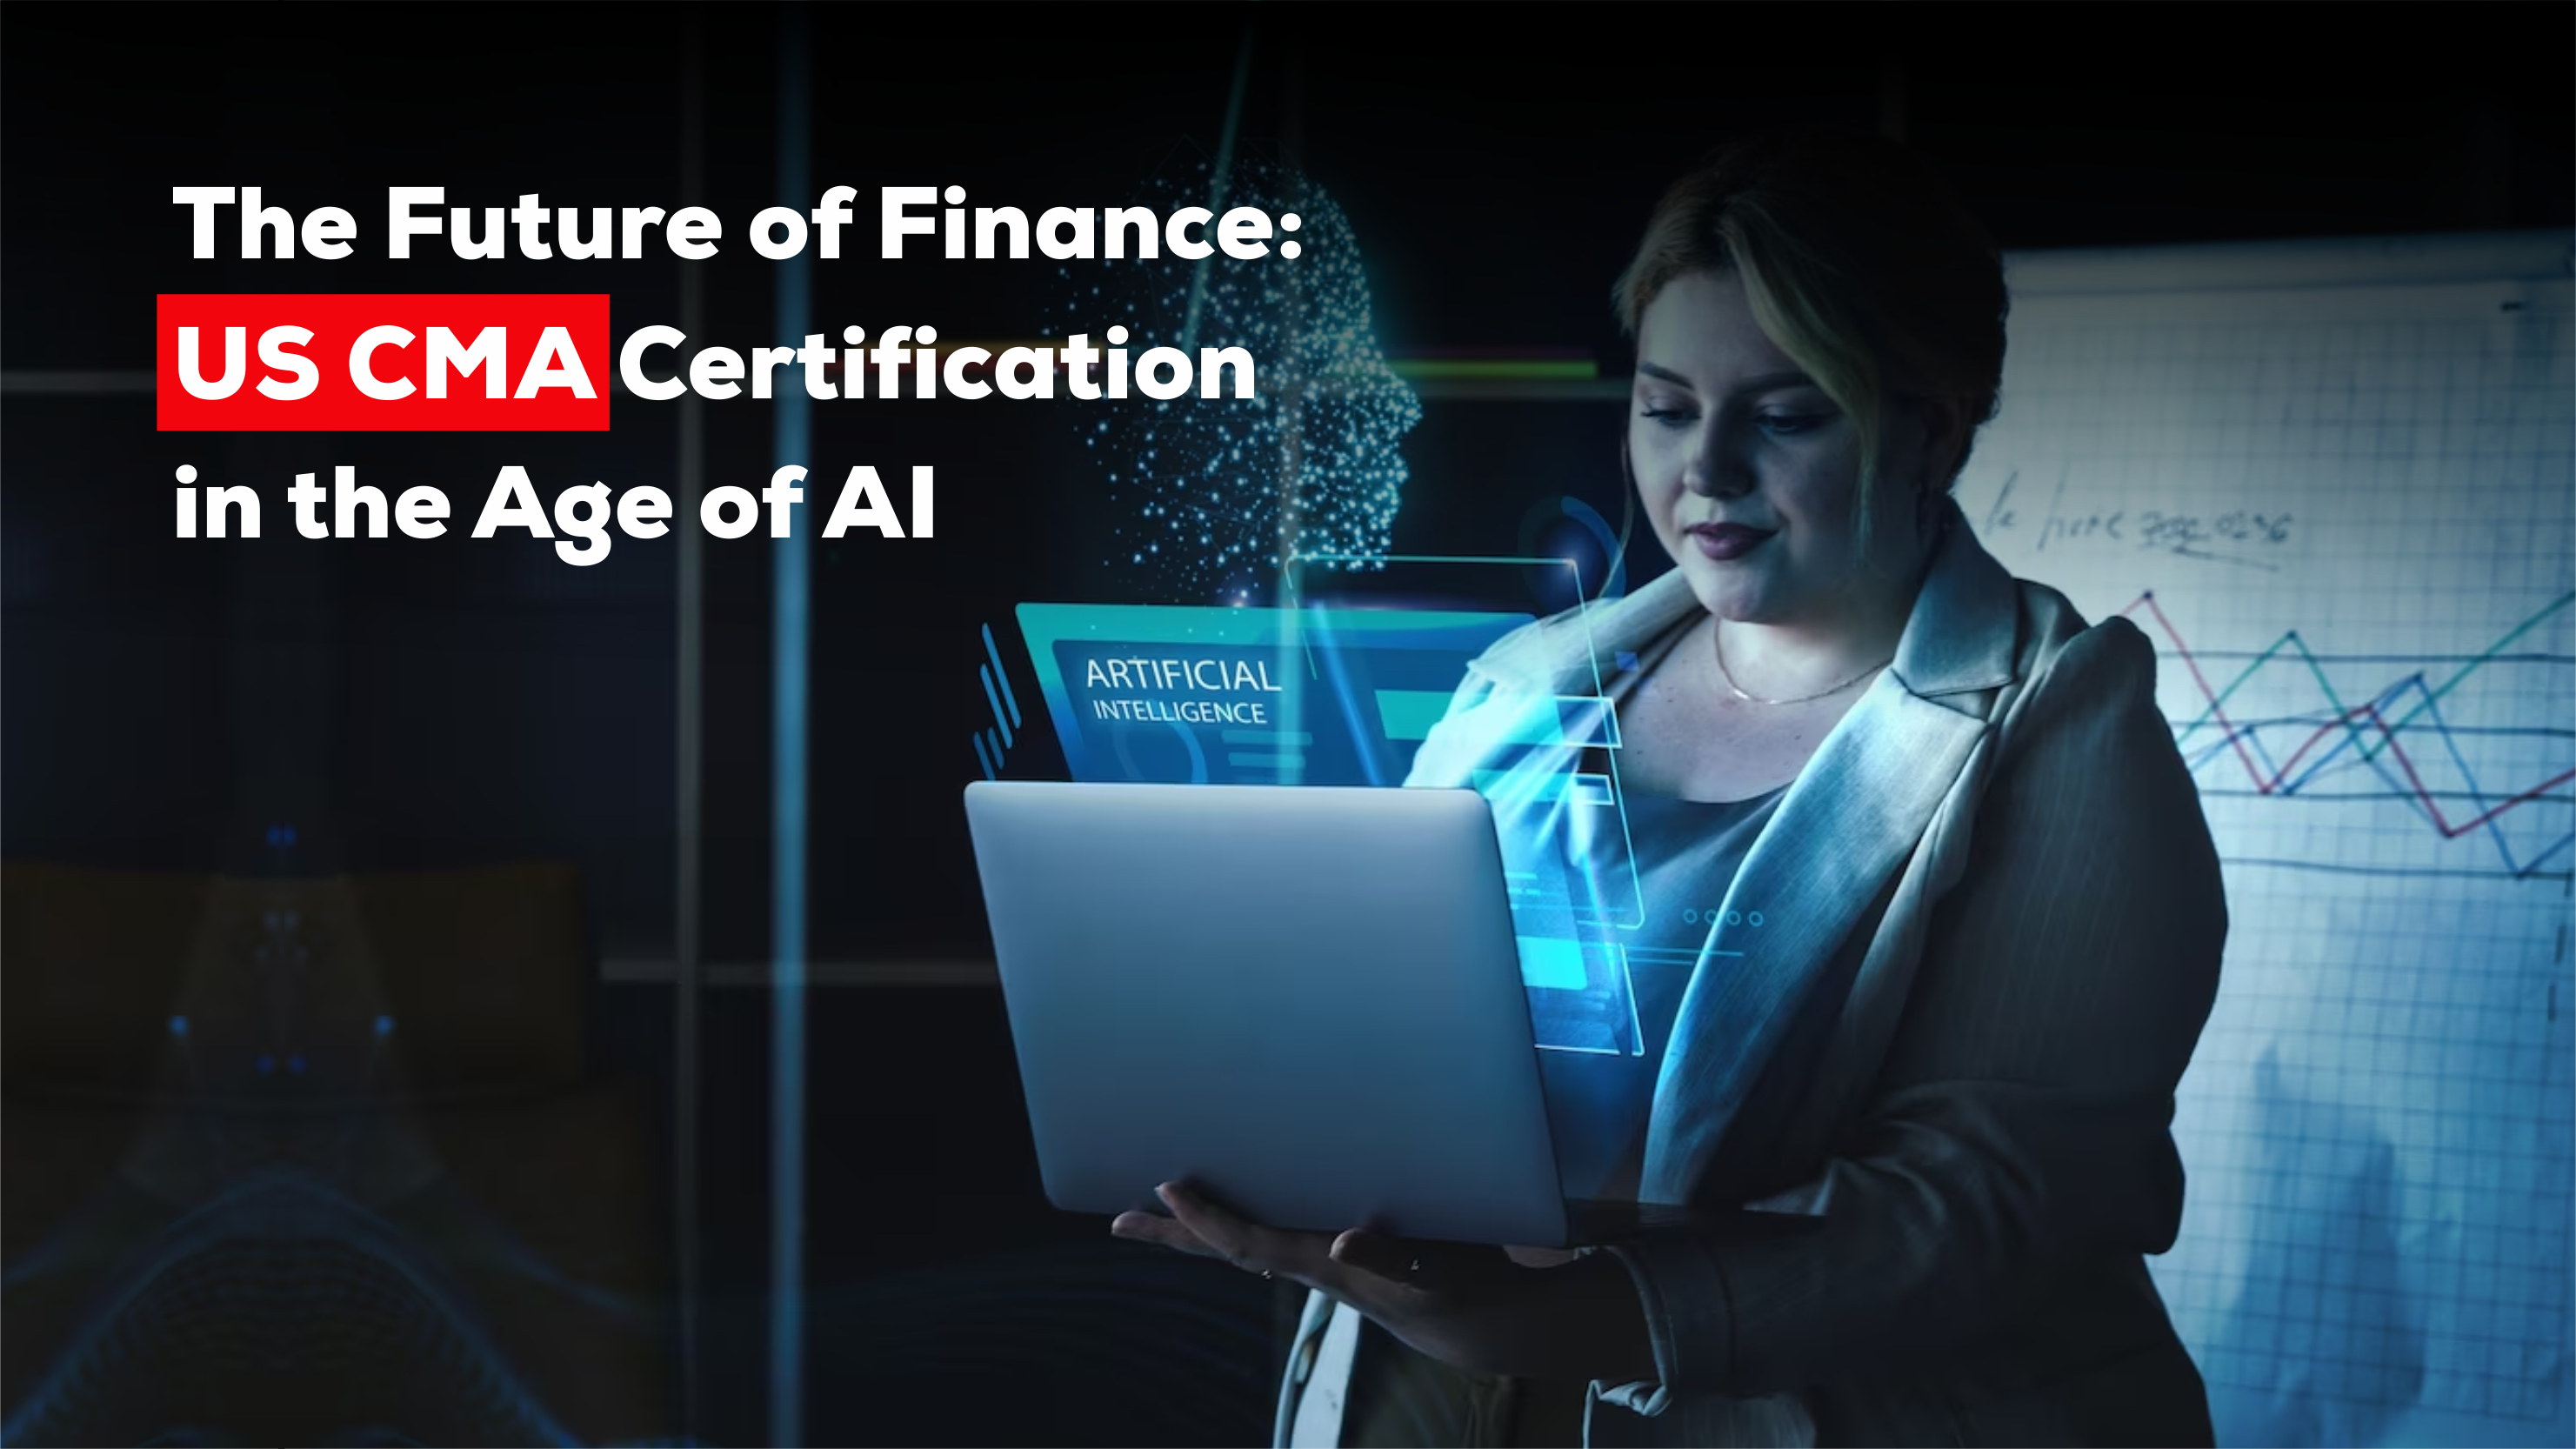 The Future of Finance- US CMA Certification in the Age of AI